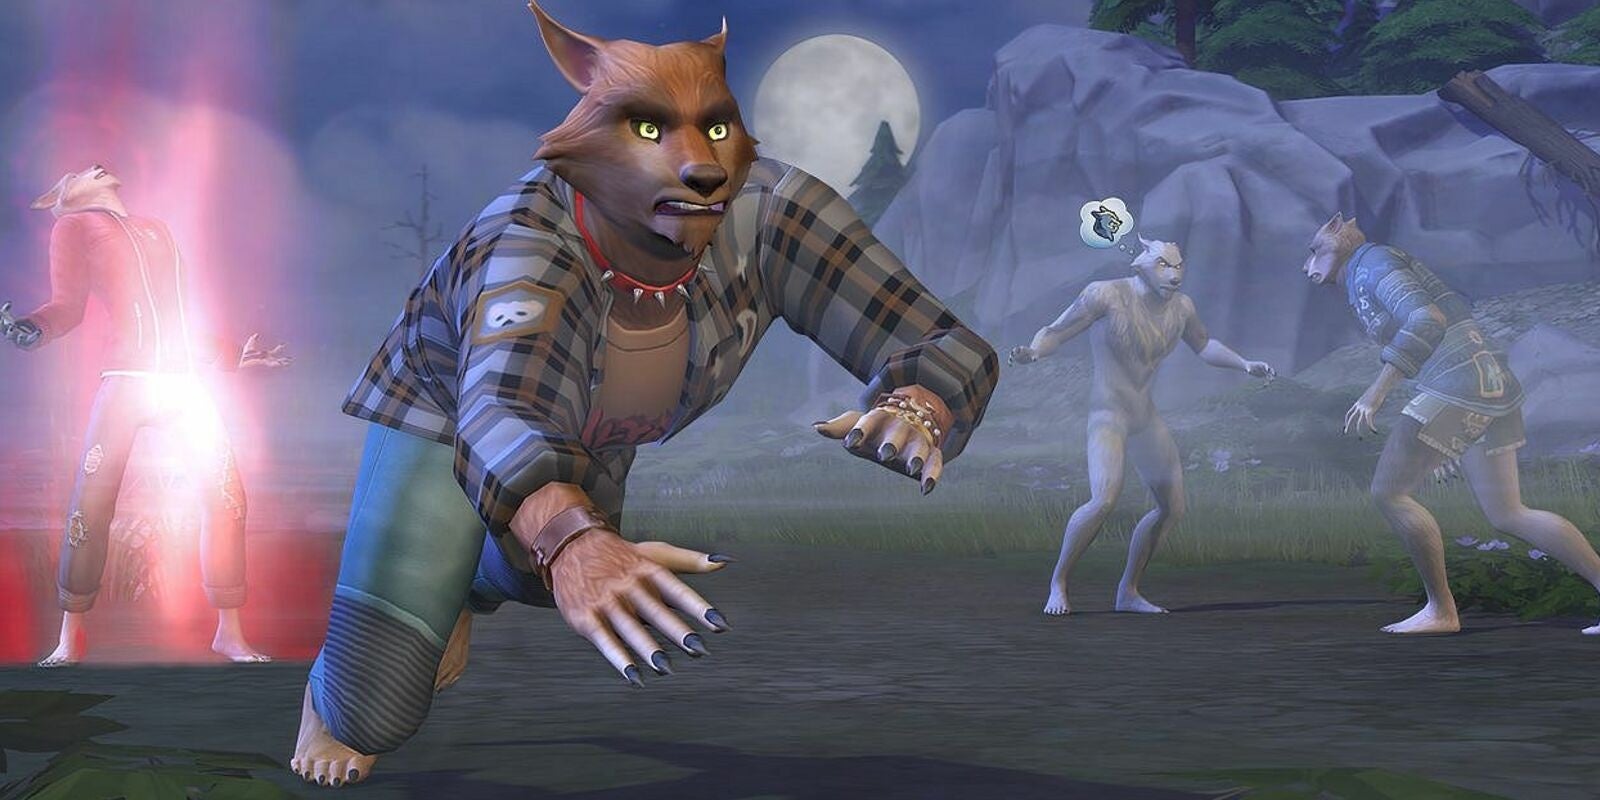 A pack of werewolves is spending time together in The Sims 4.